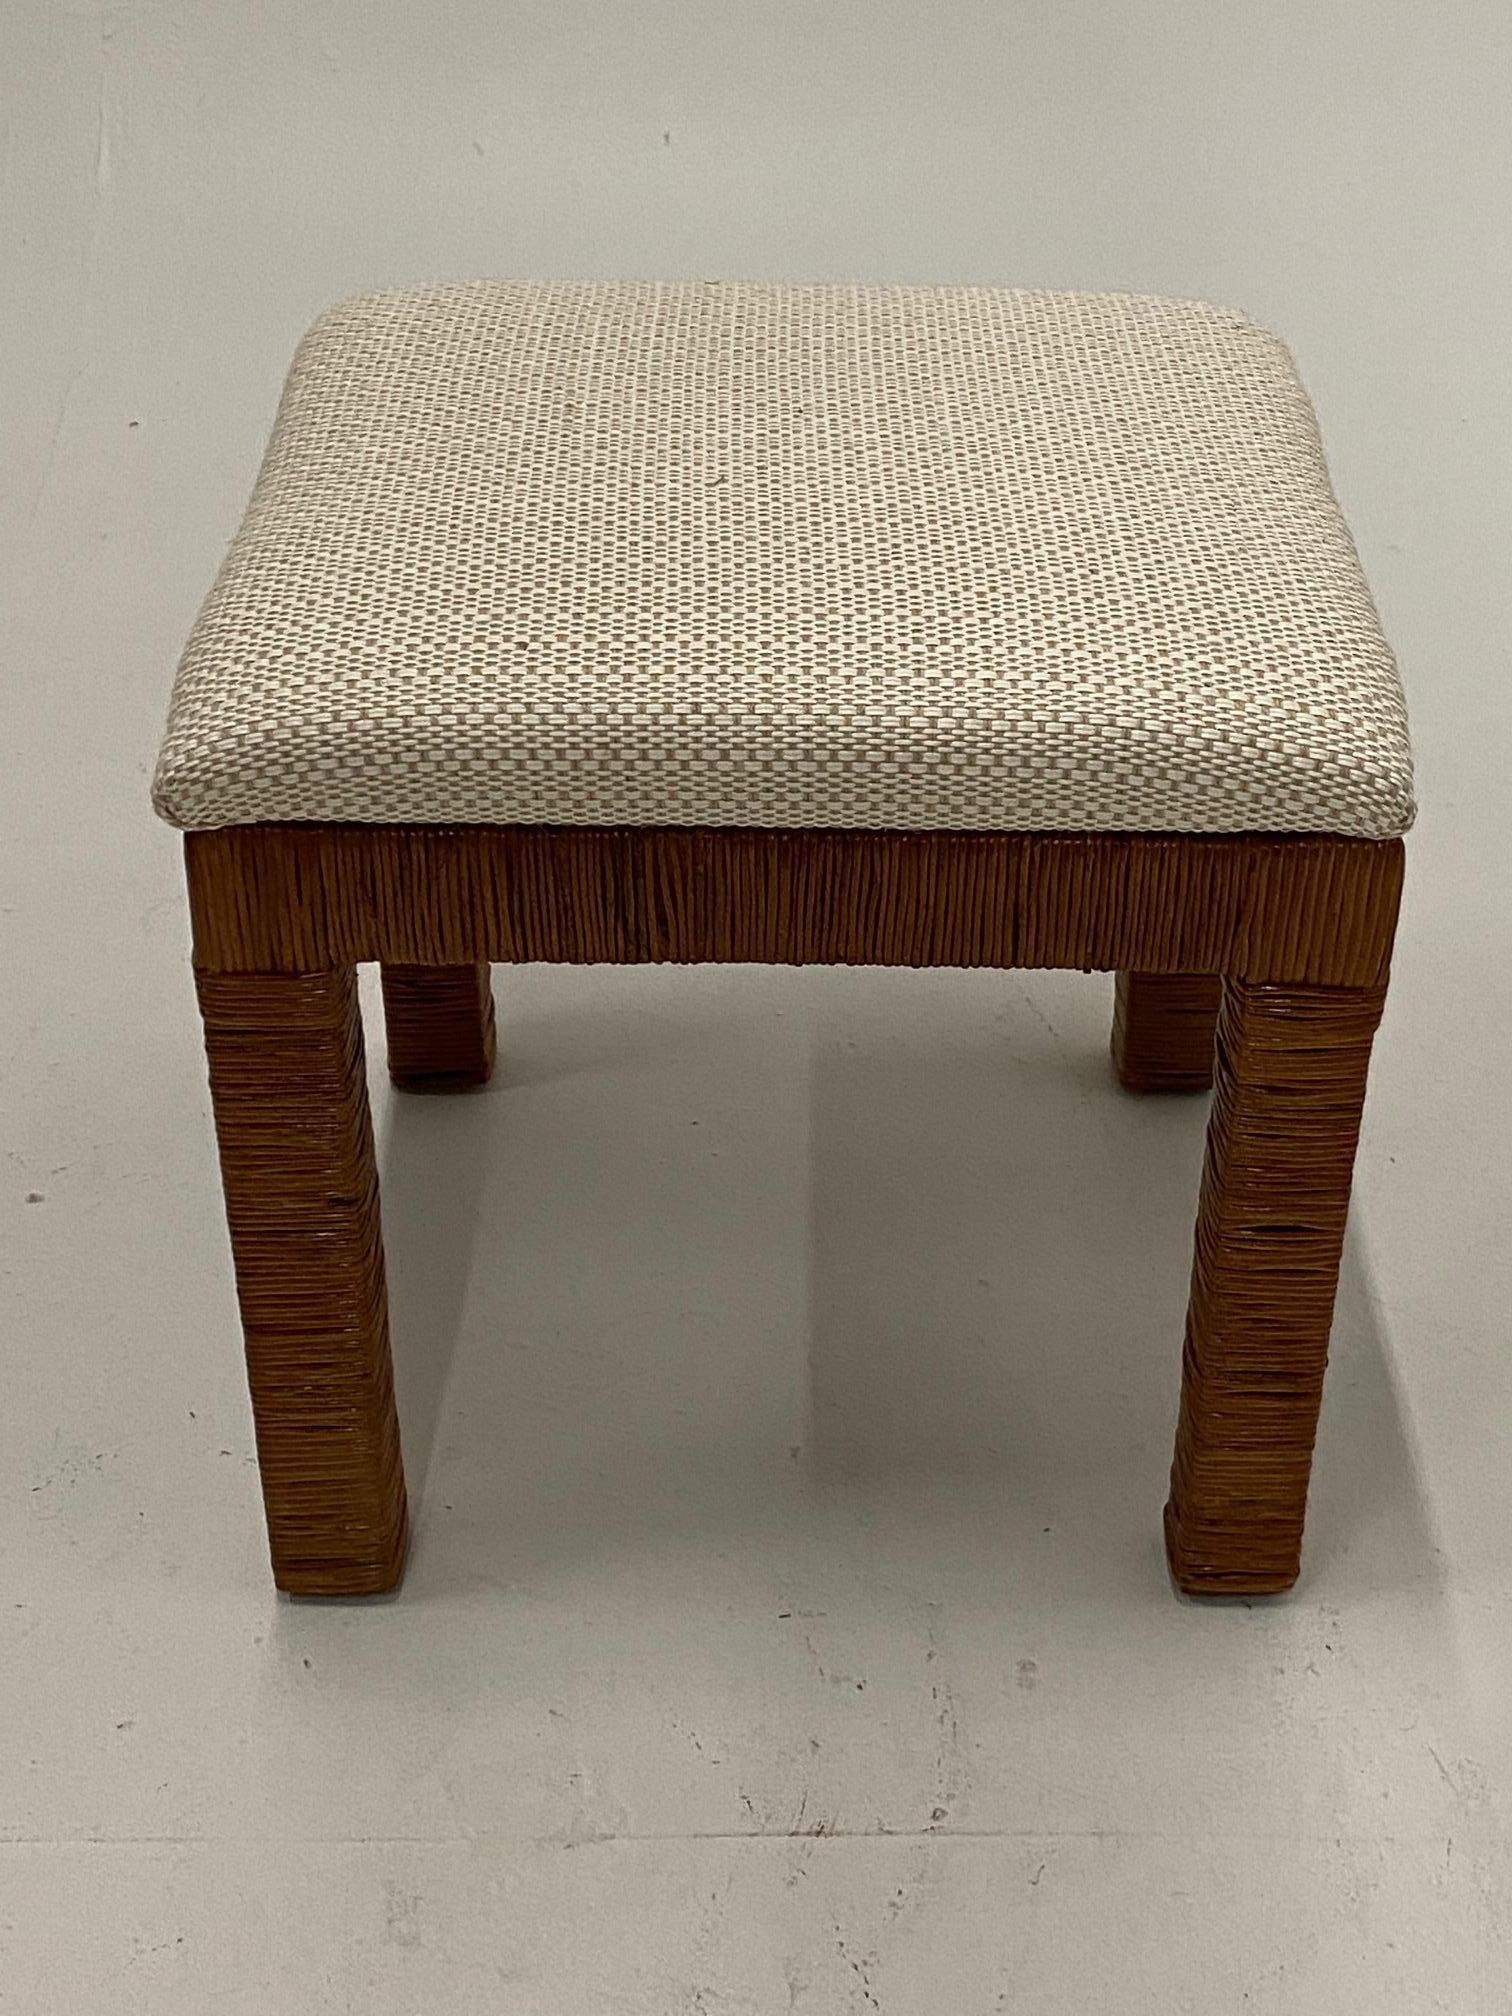 Organic Modern Stylish Pair of Newly Upholstered Woven Wicker Benches For Sale